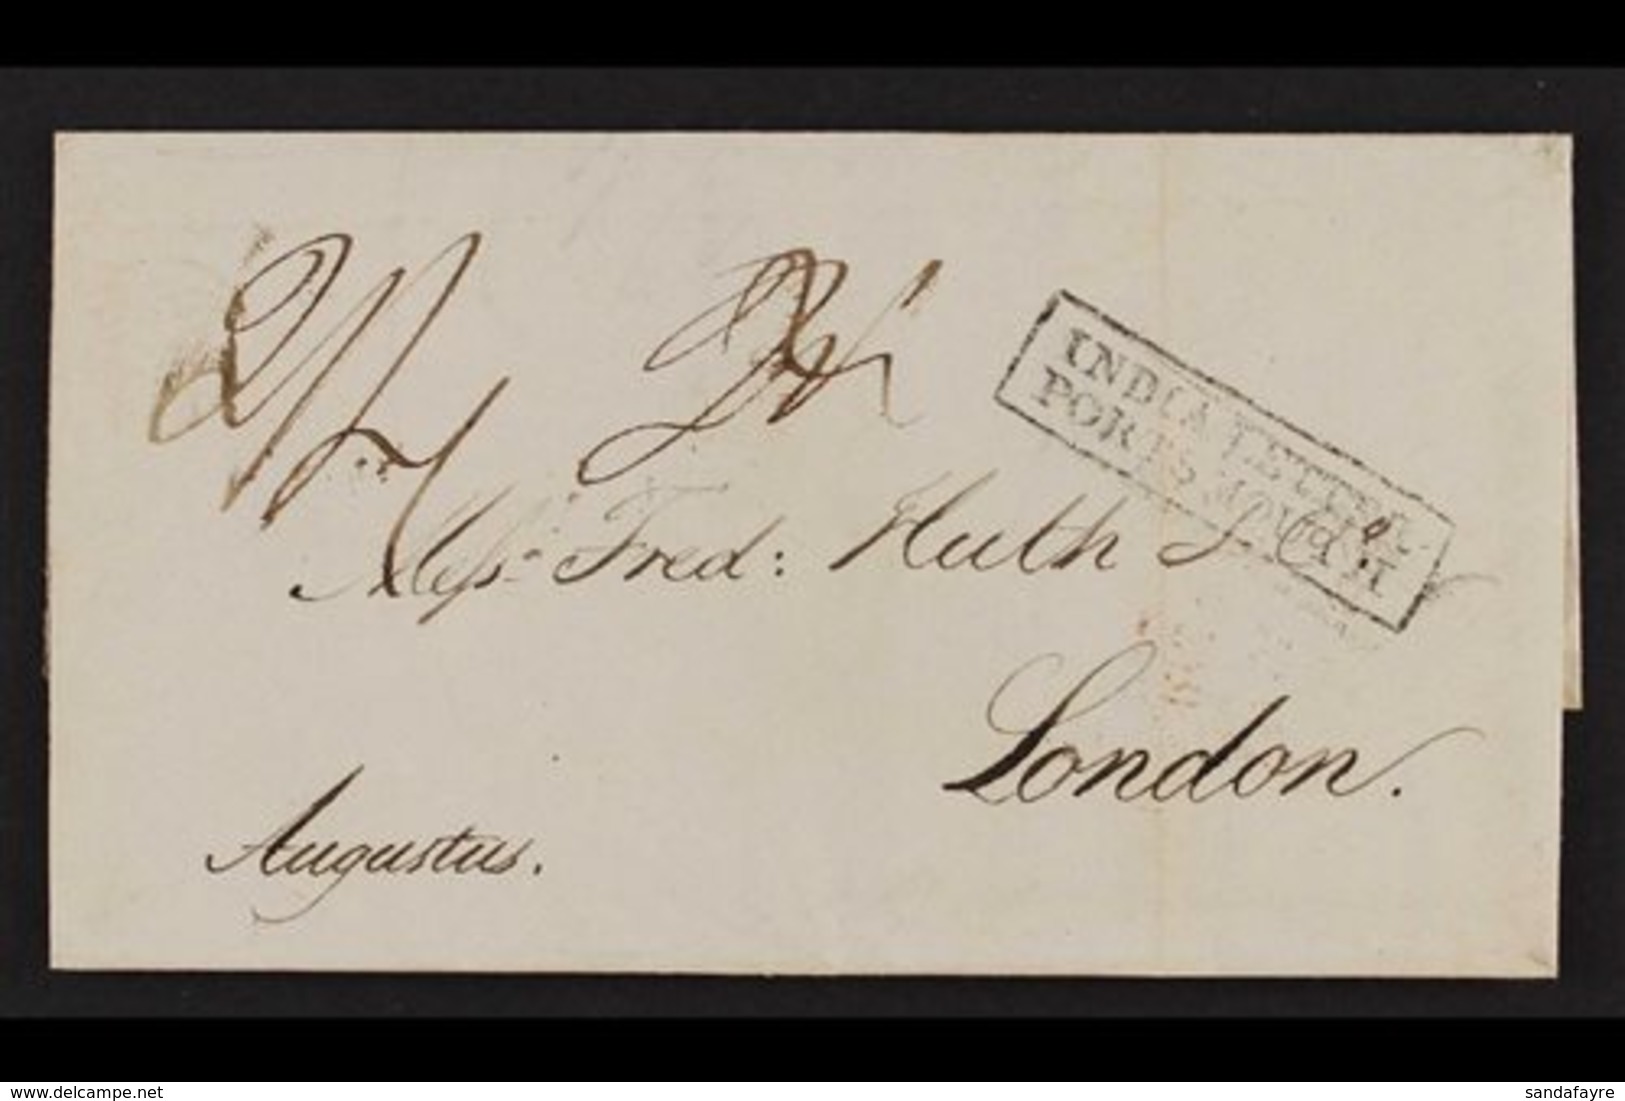 1838 (October) Letter Written In French From Port Louis To Huth In London, Endorsed "AUGUSTUS", And Showing A Red Double - Mauritius (...-1967)